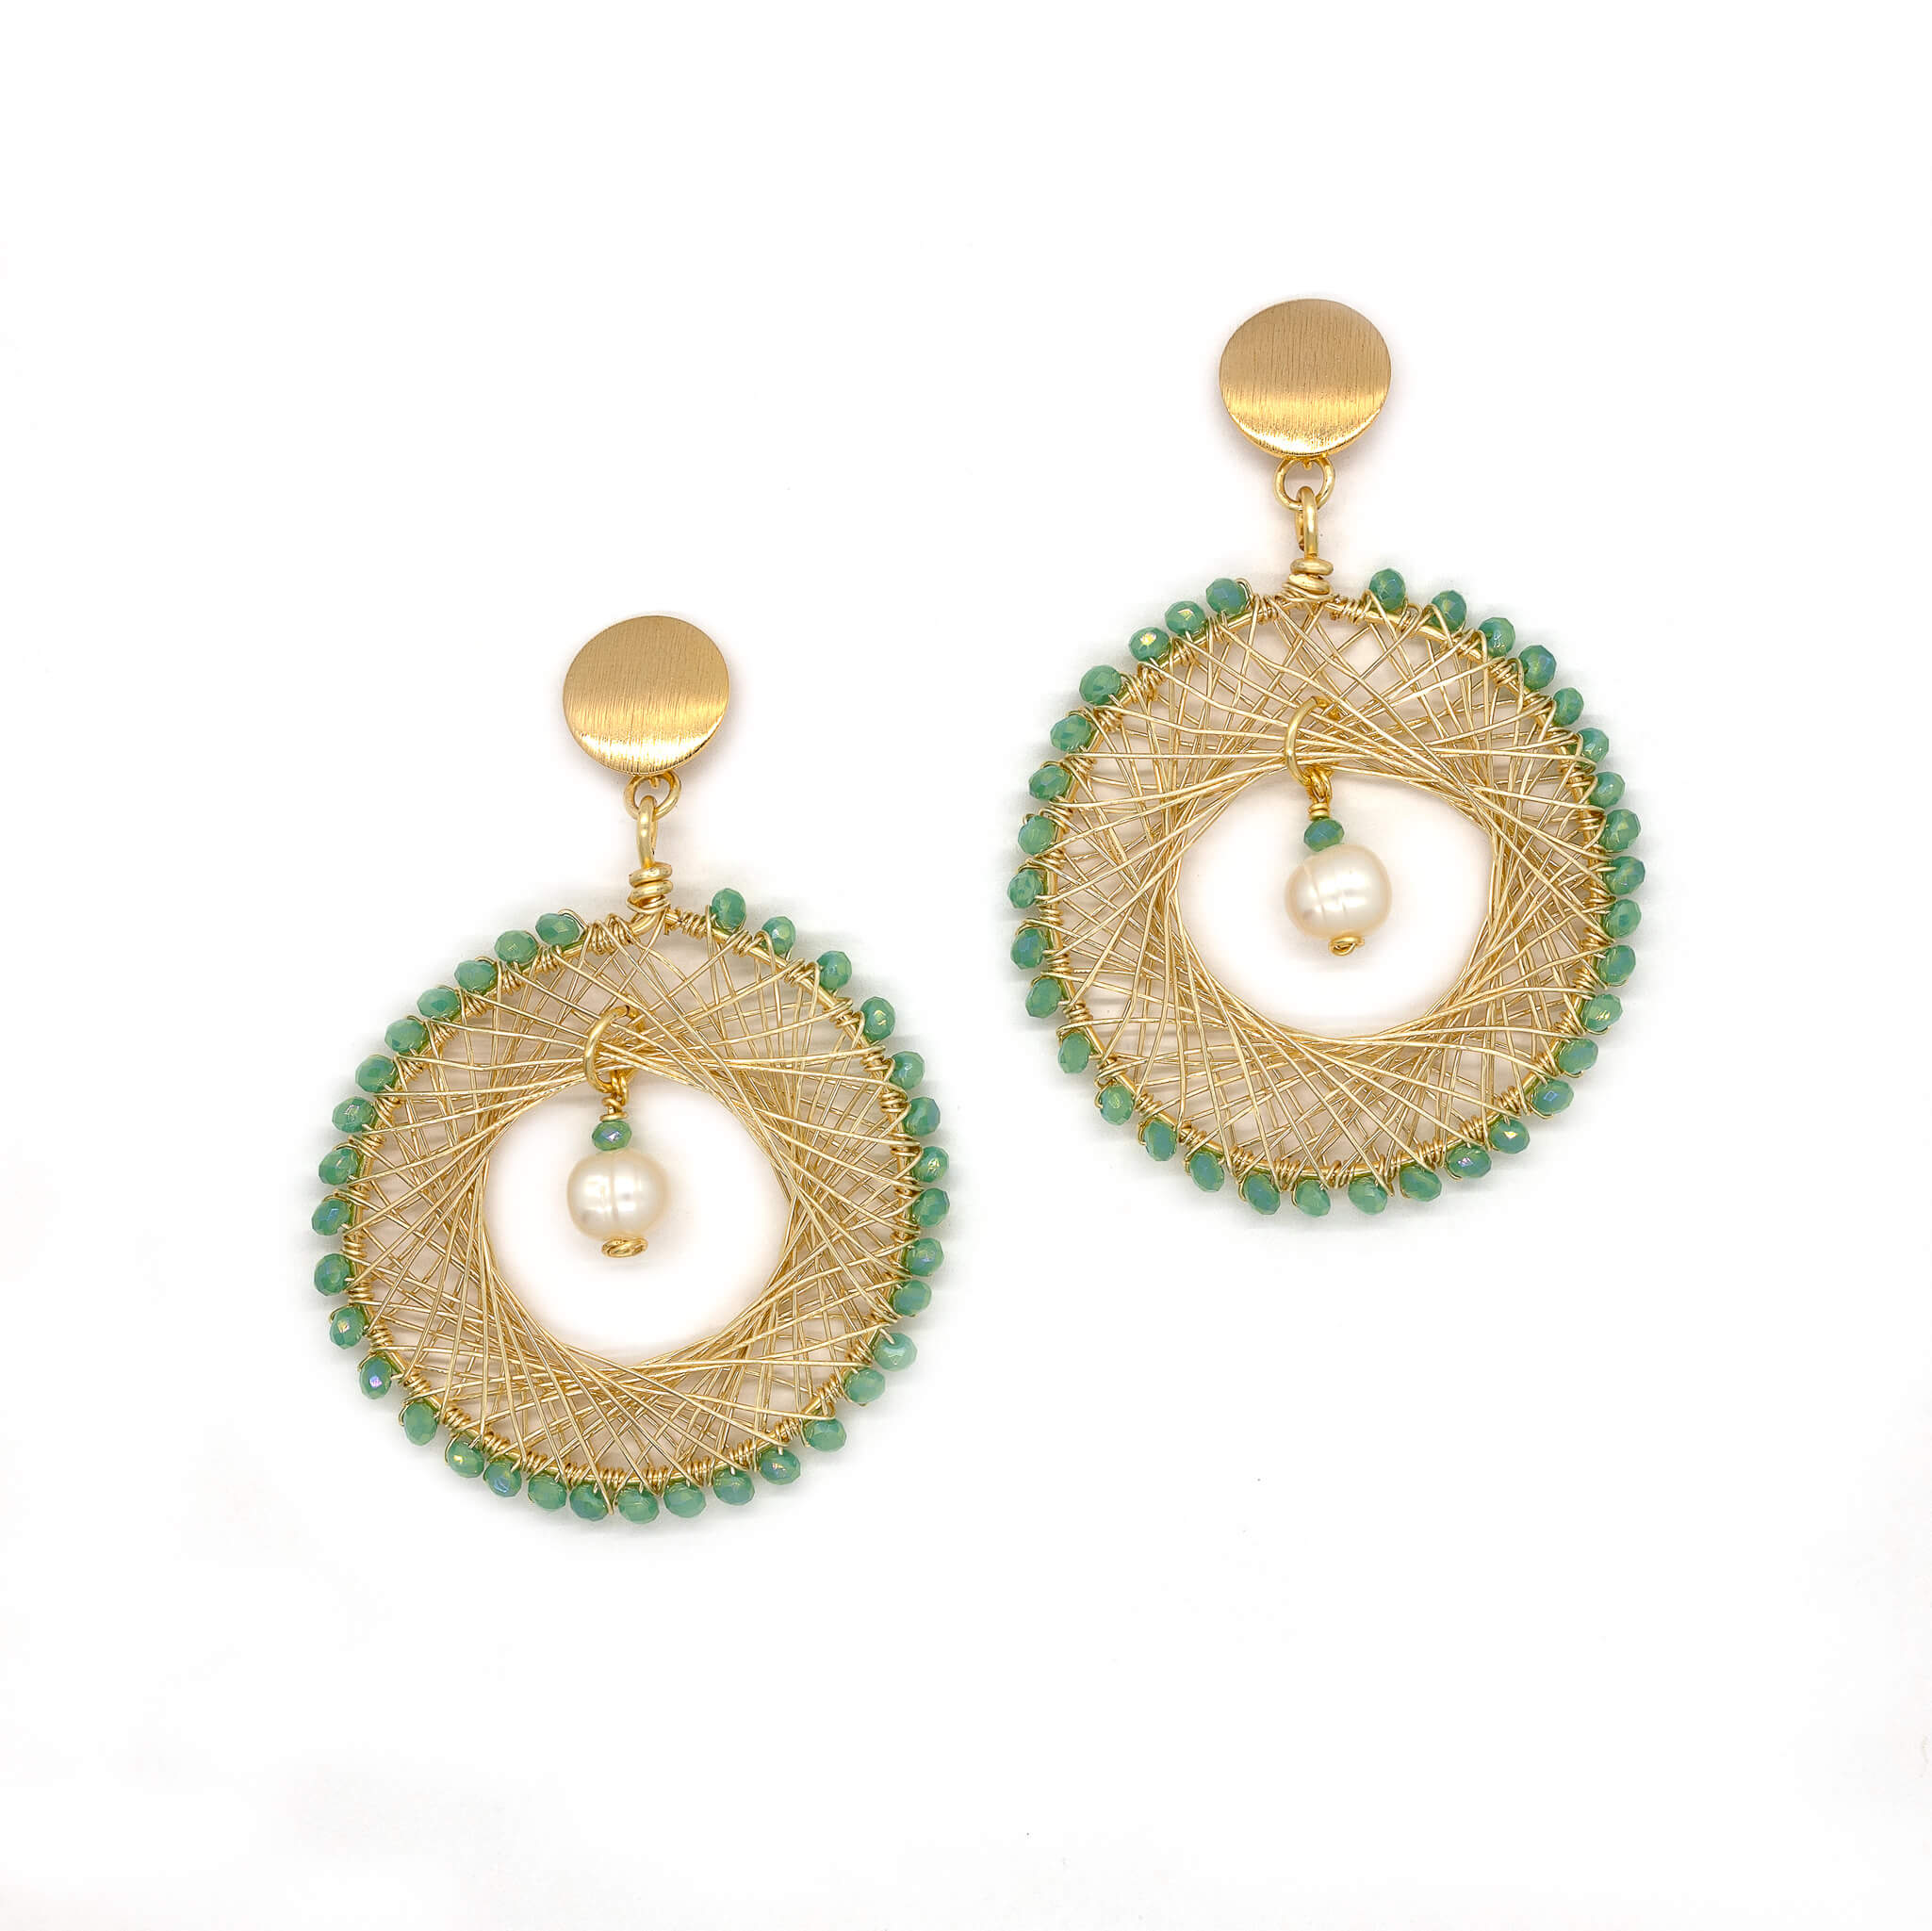 Amazon.com: Two circles handmade Earrings by D'Mundo Accesorios. 24Kt  Yellow Gold Plated Earrings. : Handmade Products